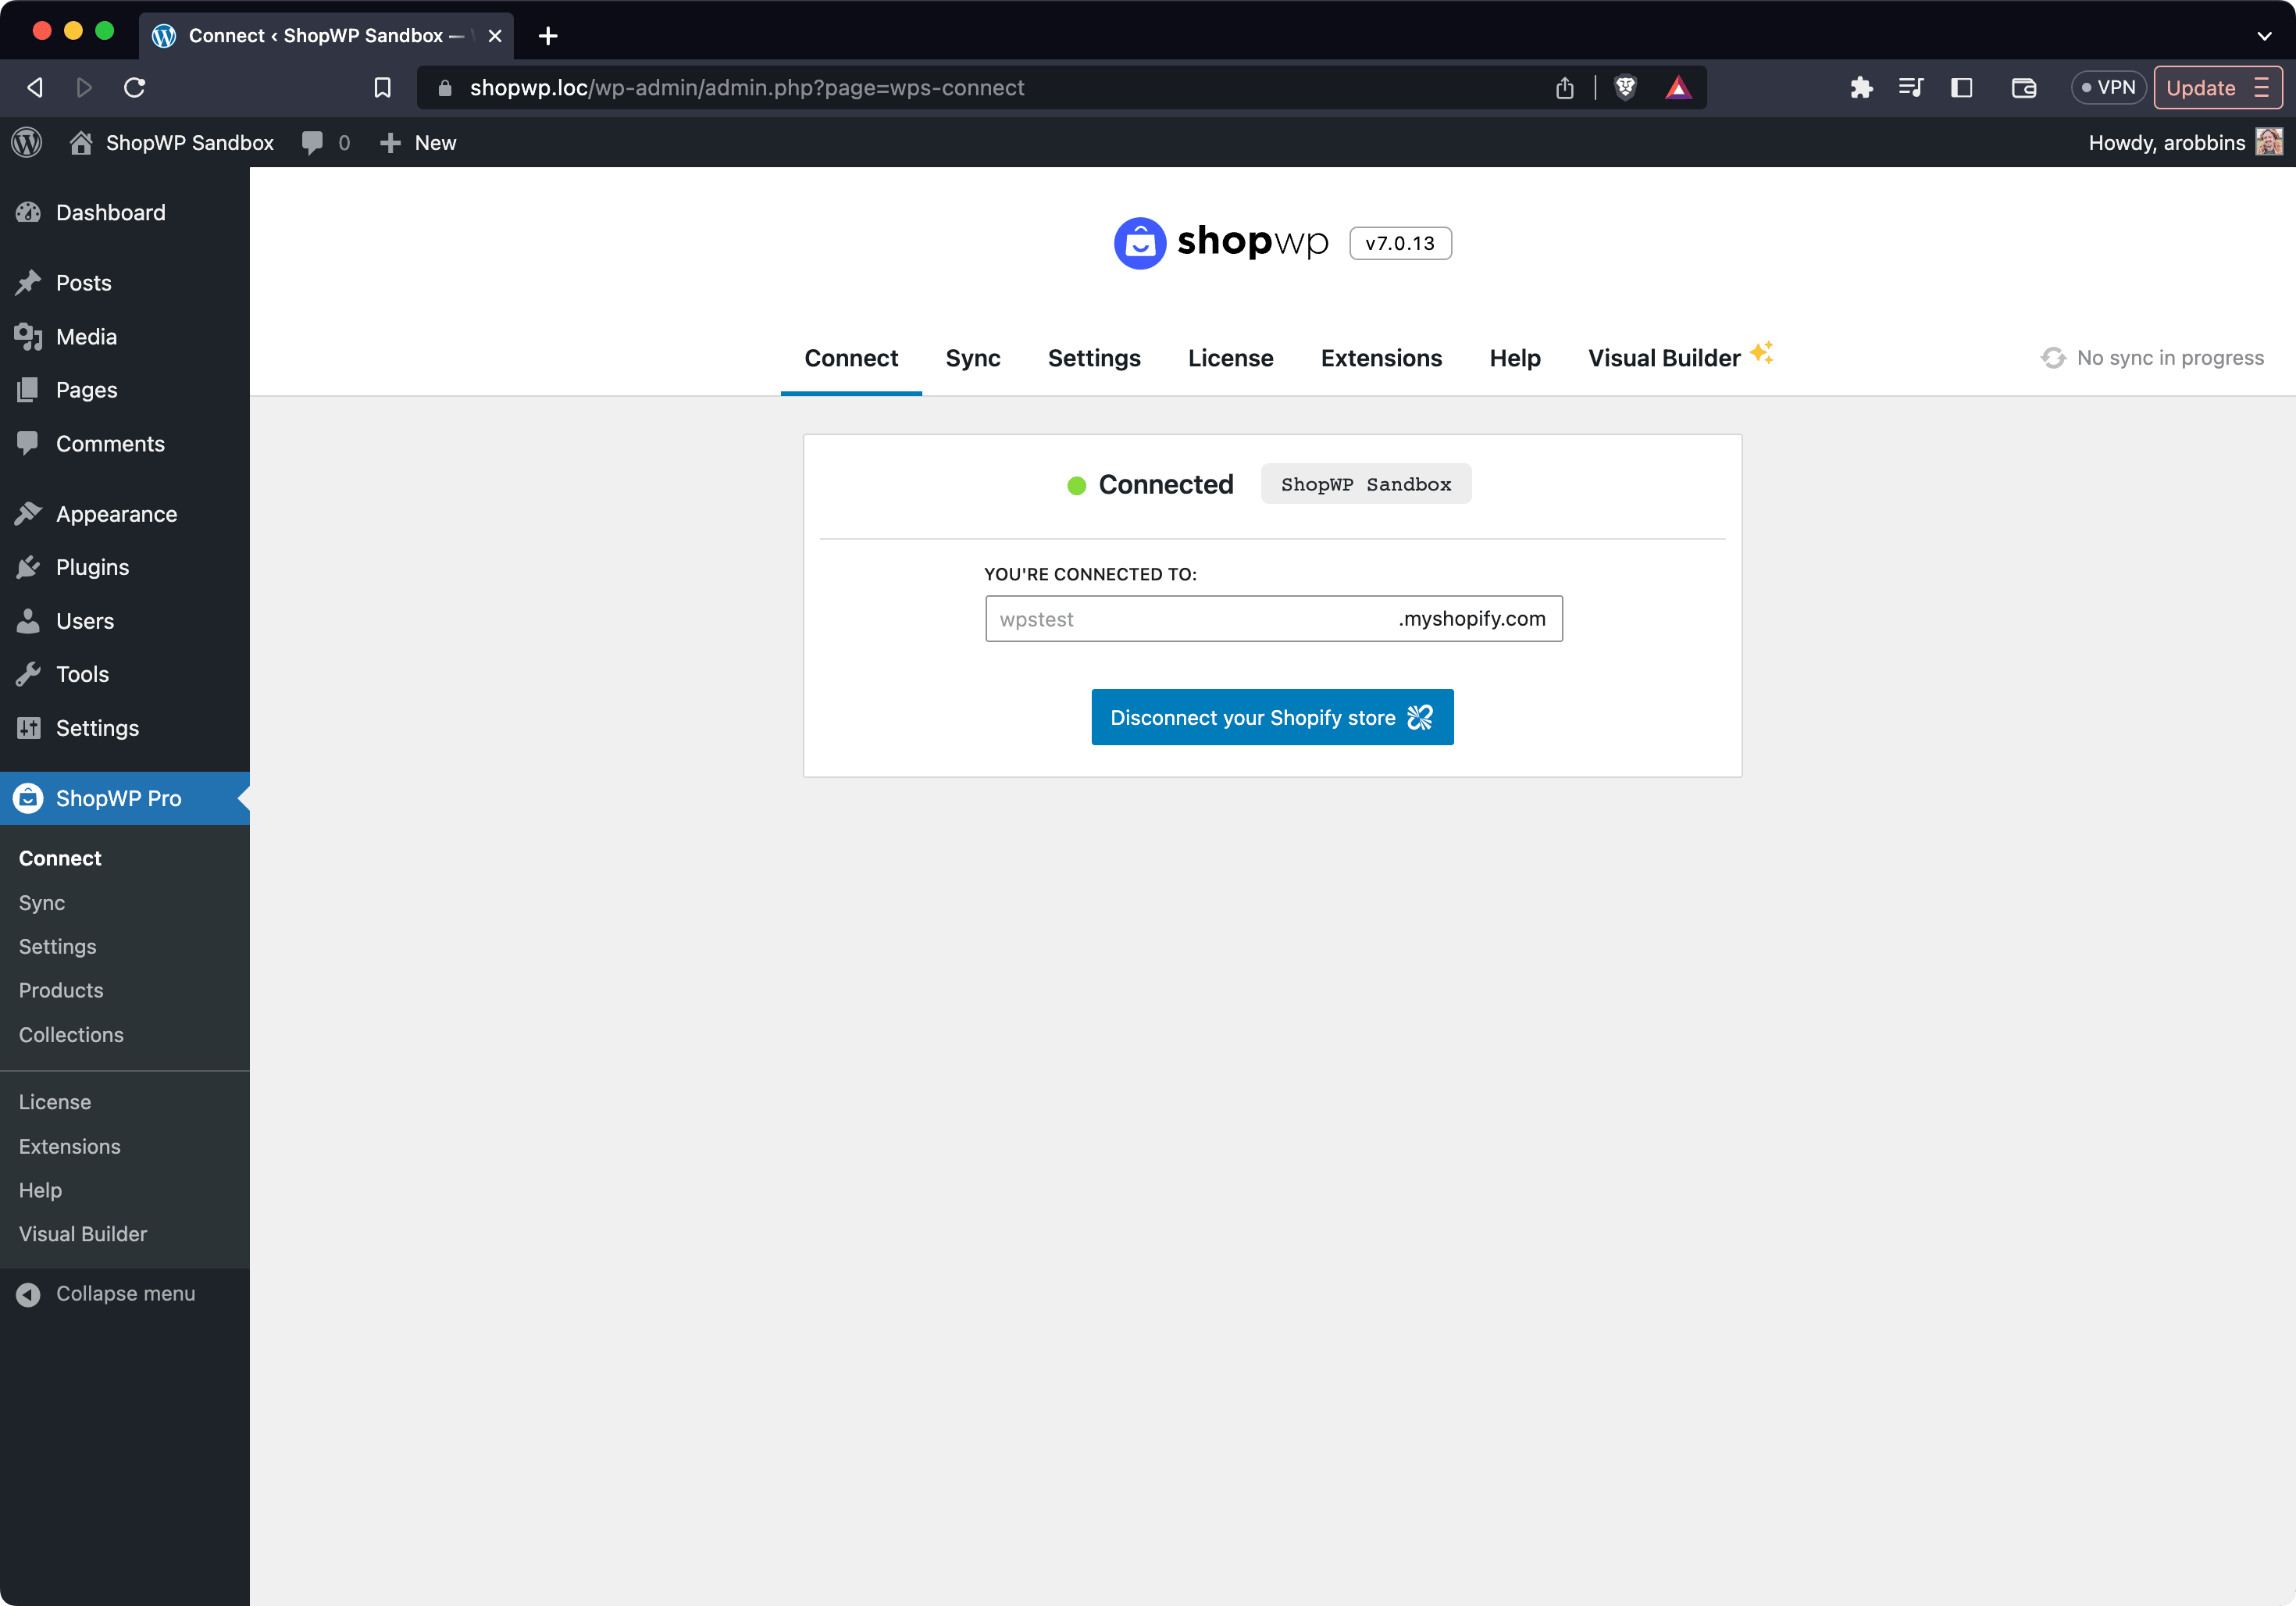 ShopWP Connect tab